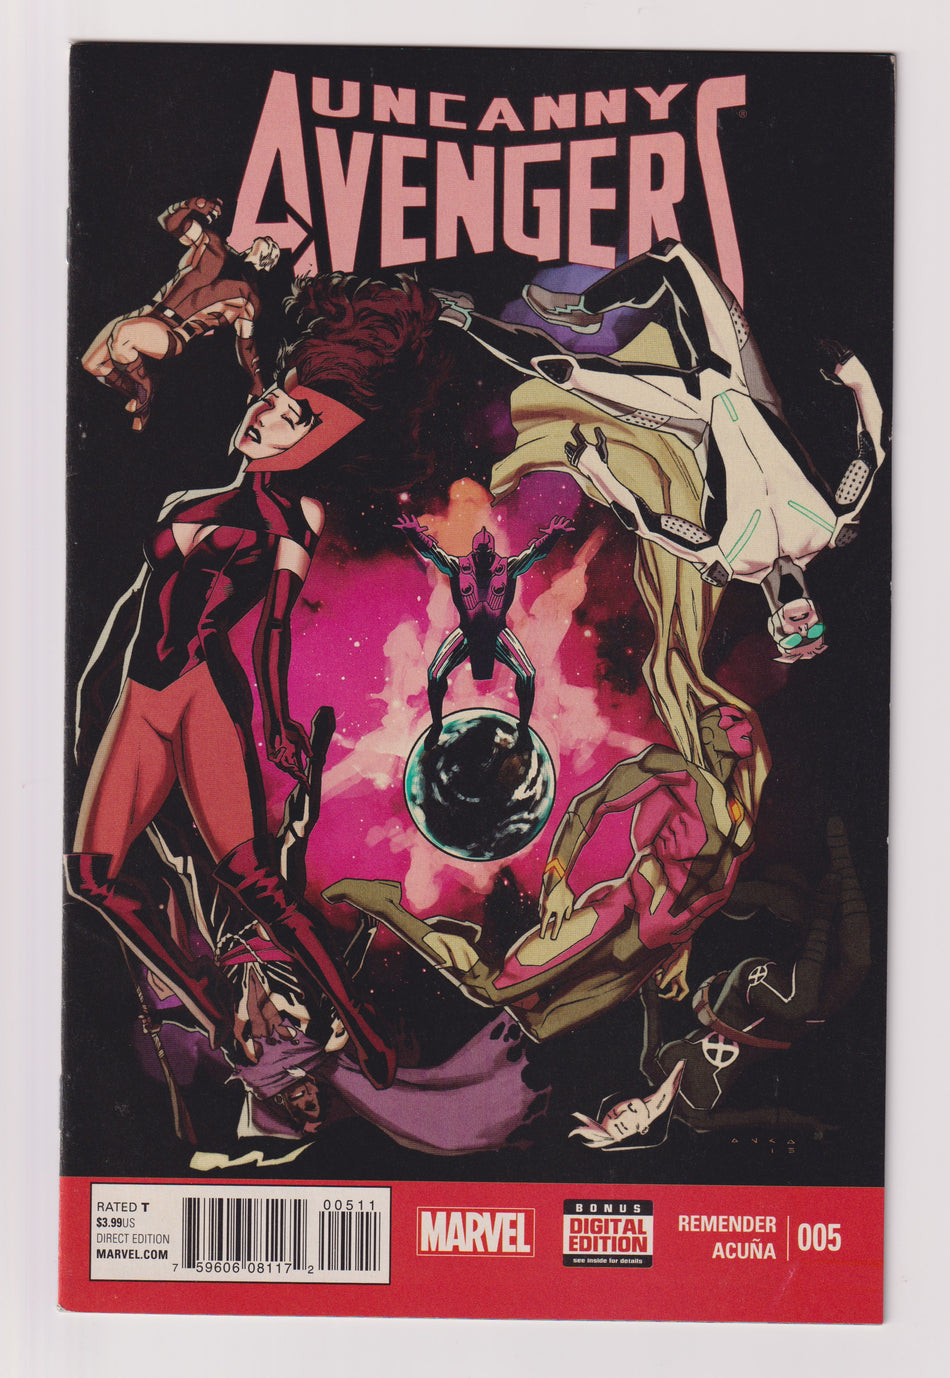 Photo of Uncanny Avengers, Vol. 2 (2015)  Iss 5A   Comic sold by Stronghold Collectibles